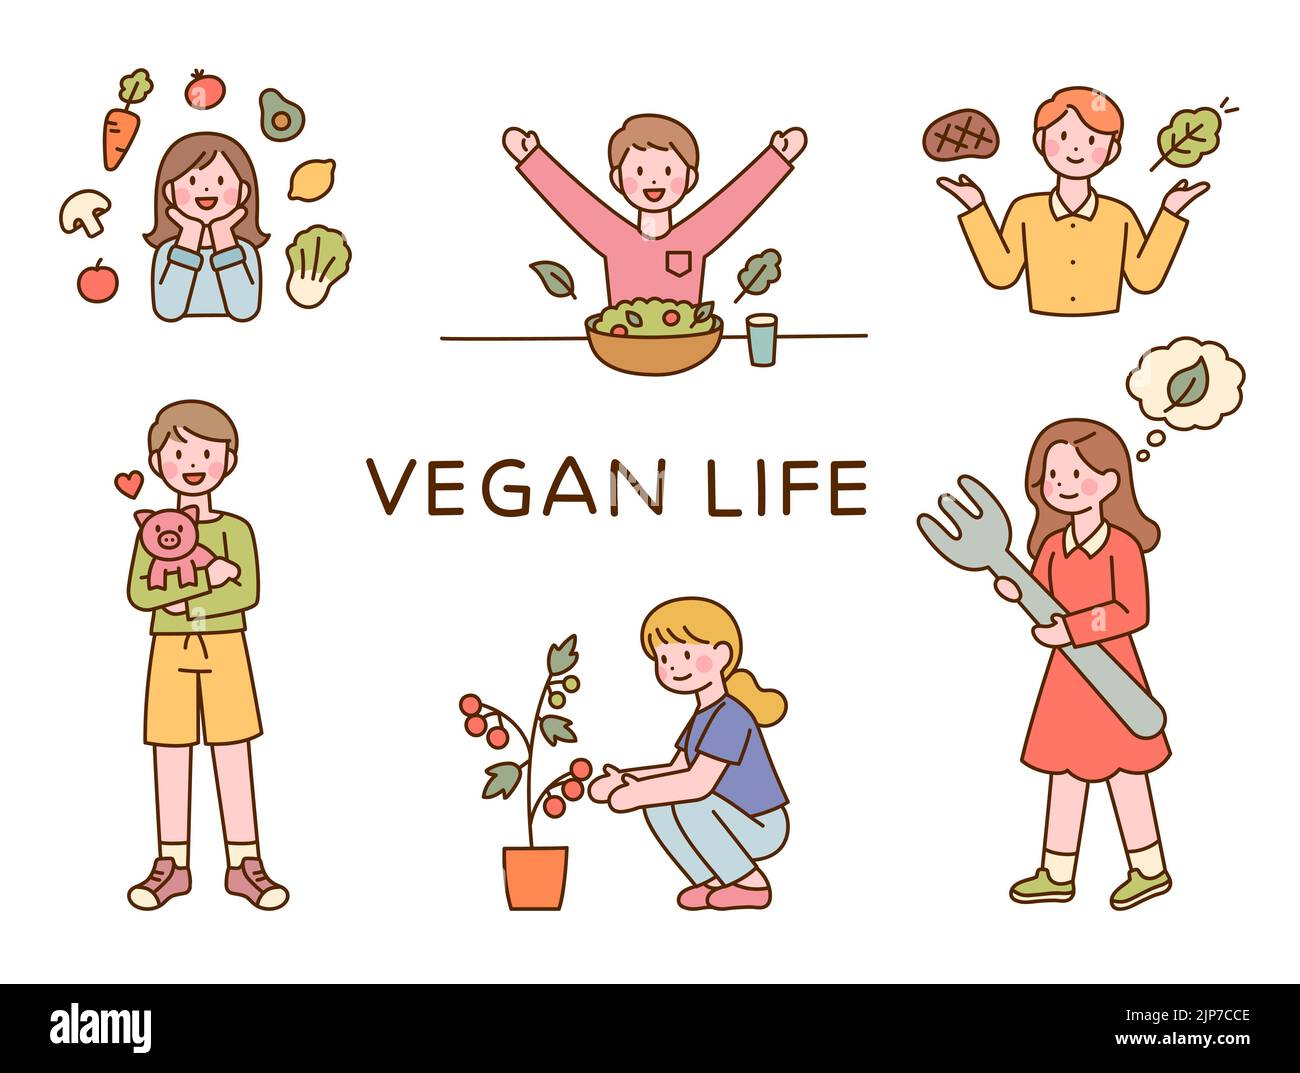 vegan life. A person holding a baby pig. People who grow and eat vegetables. flat design style vector illustration. Stock Photo